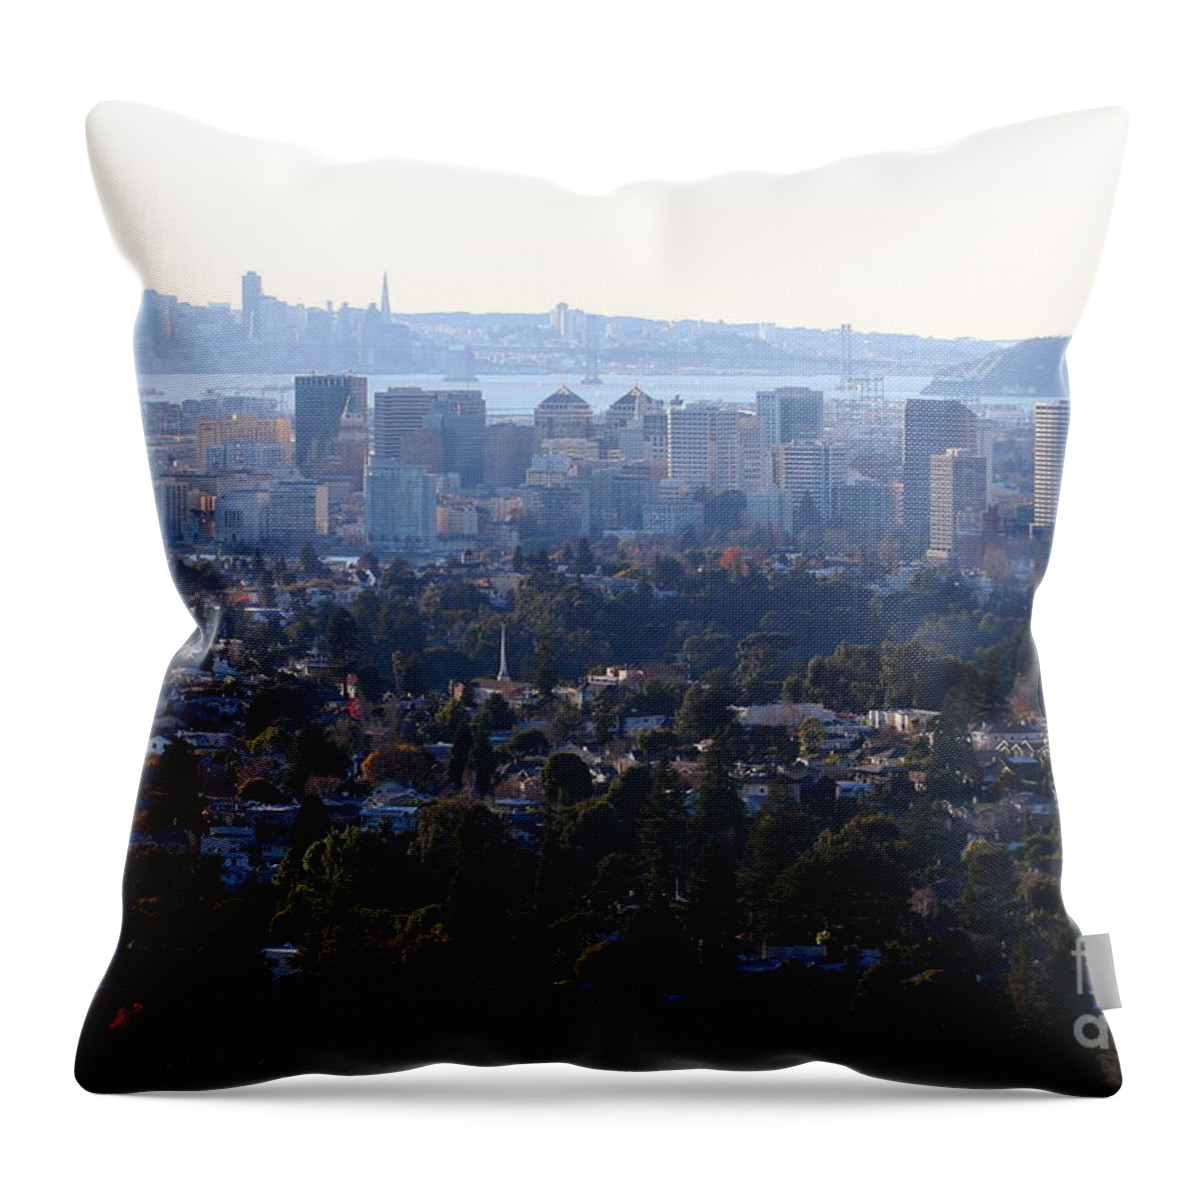 Bayarea Throw Pillow featuring the photograph Hazy San Francisco Skyline Viewed Through The Oakland Skyline . 7D11341 by Wingsdomain Art and Photography